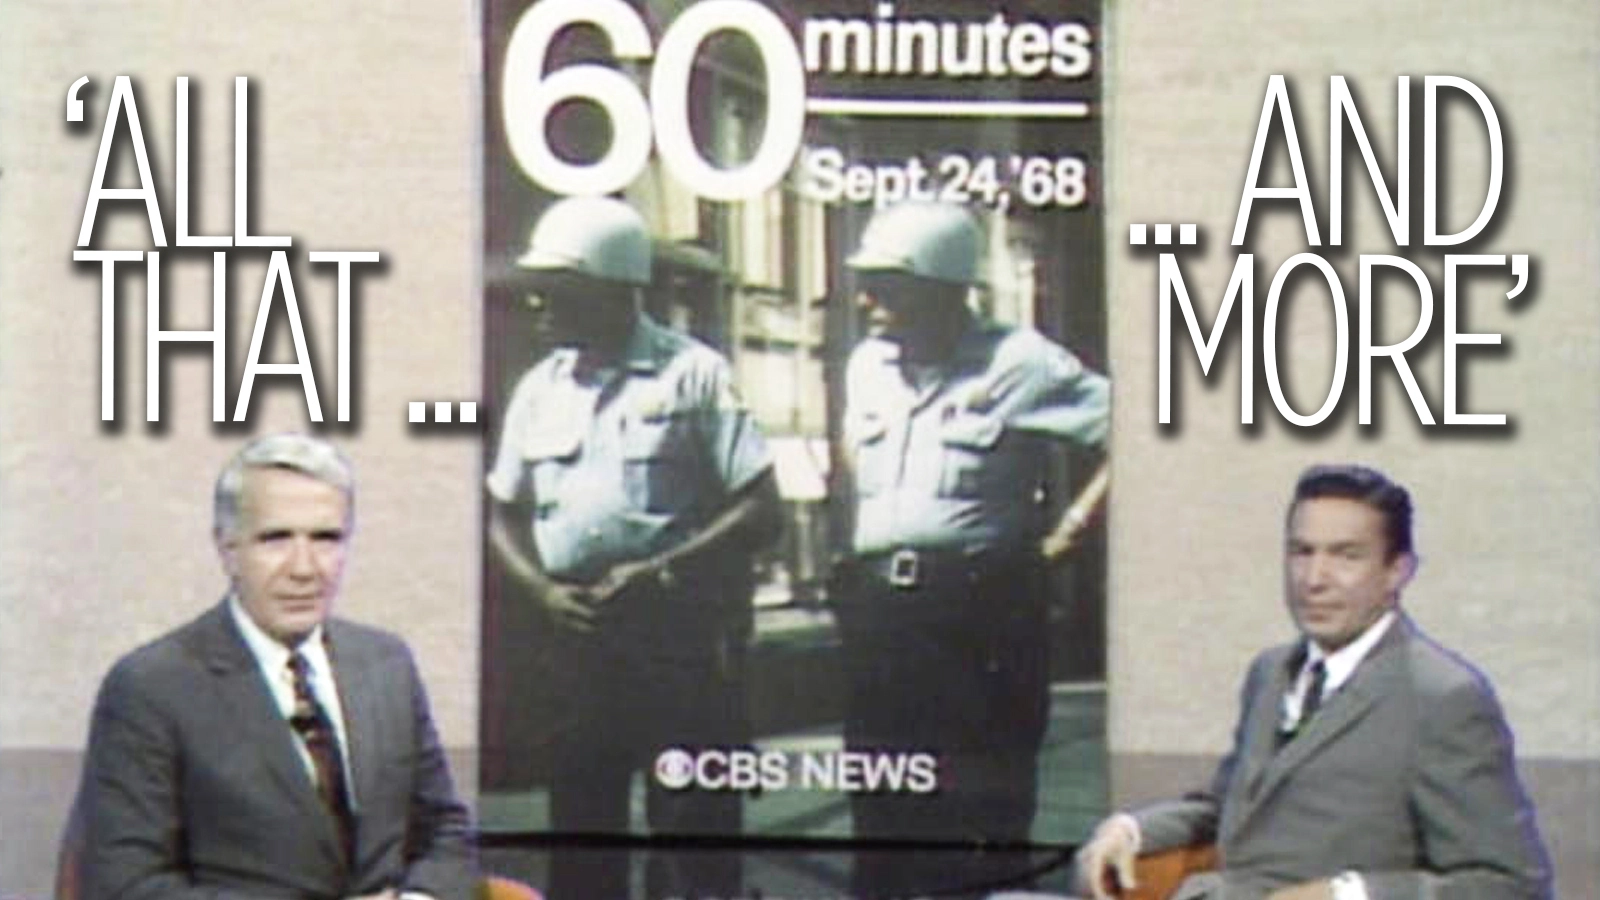 Opening graphic and header of 60 minutes.